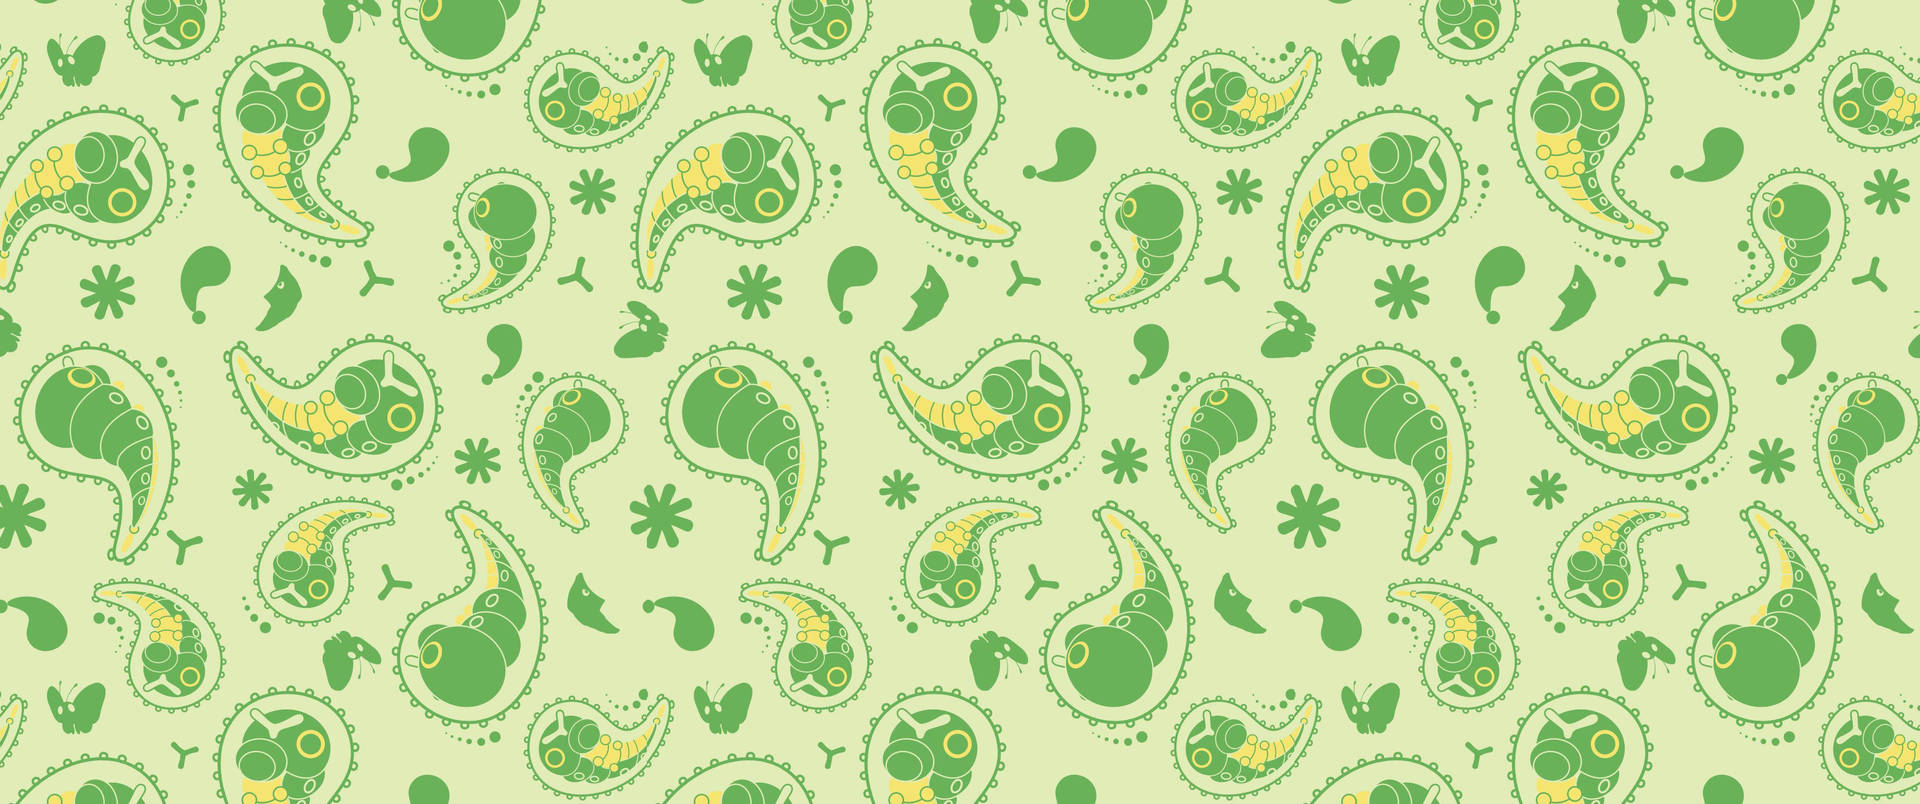 Caterpie Hd Wallpapers